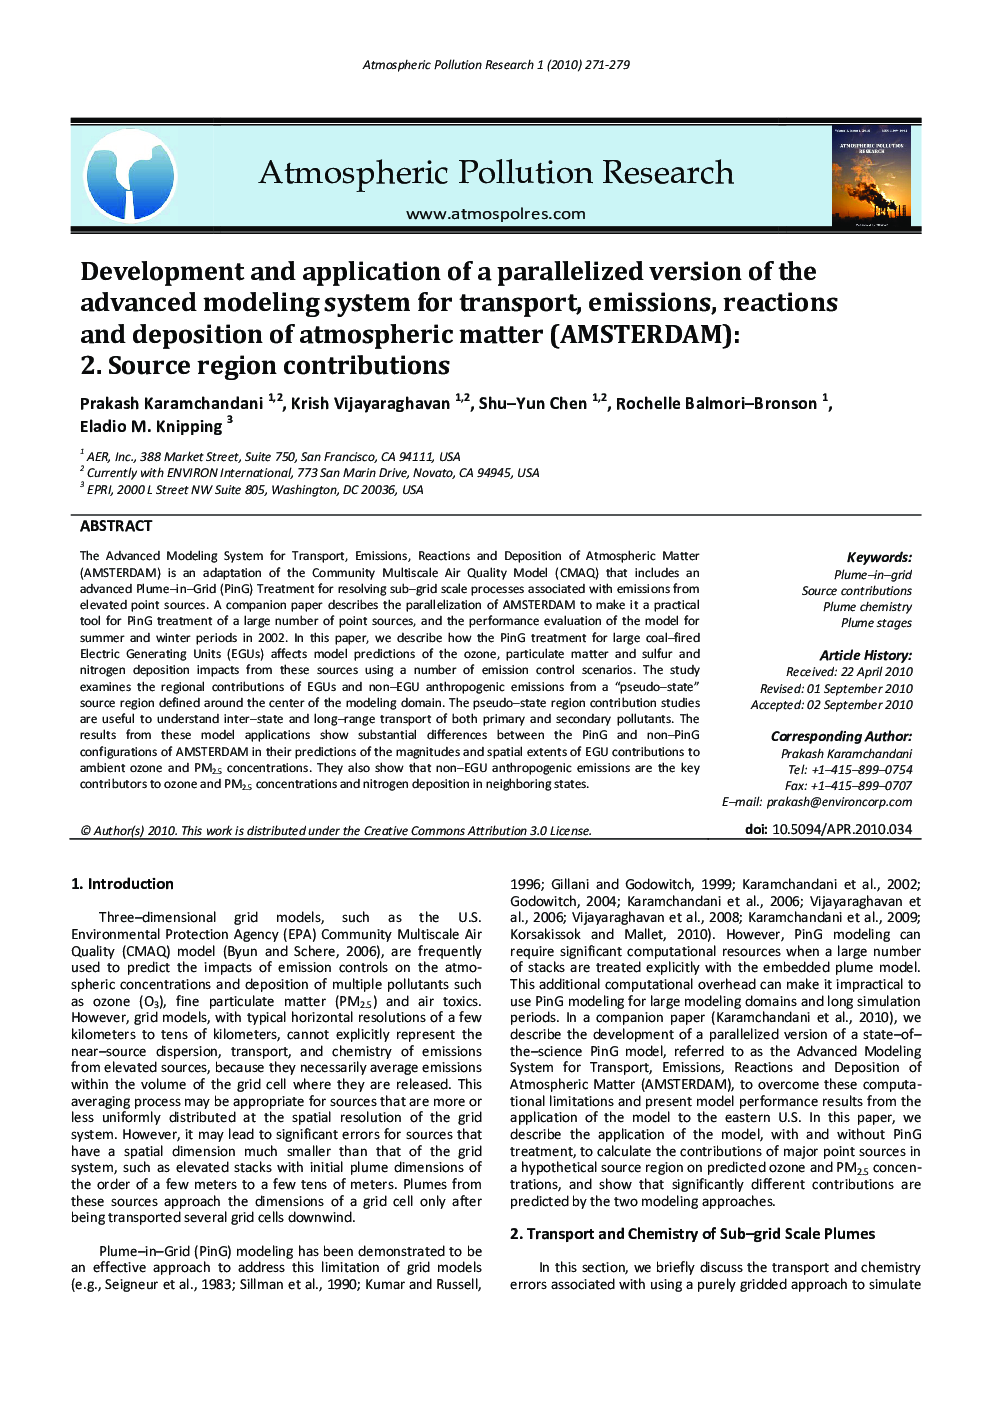 Development and application of a parallelized version of the advanced modeling system for transport, emissions, reactions and deposition of atmospheric matter (AMSTERDAM): 2. Source region contributions